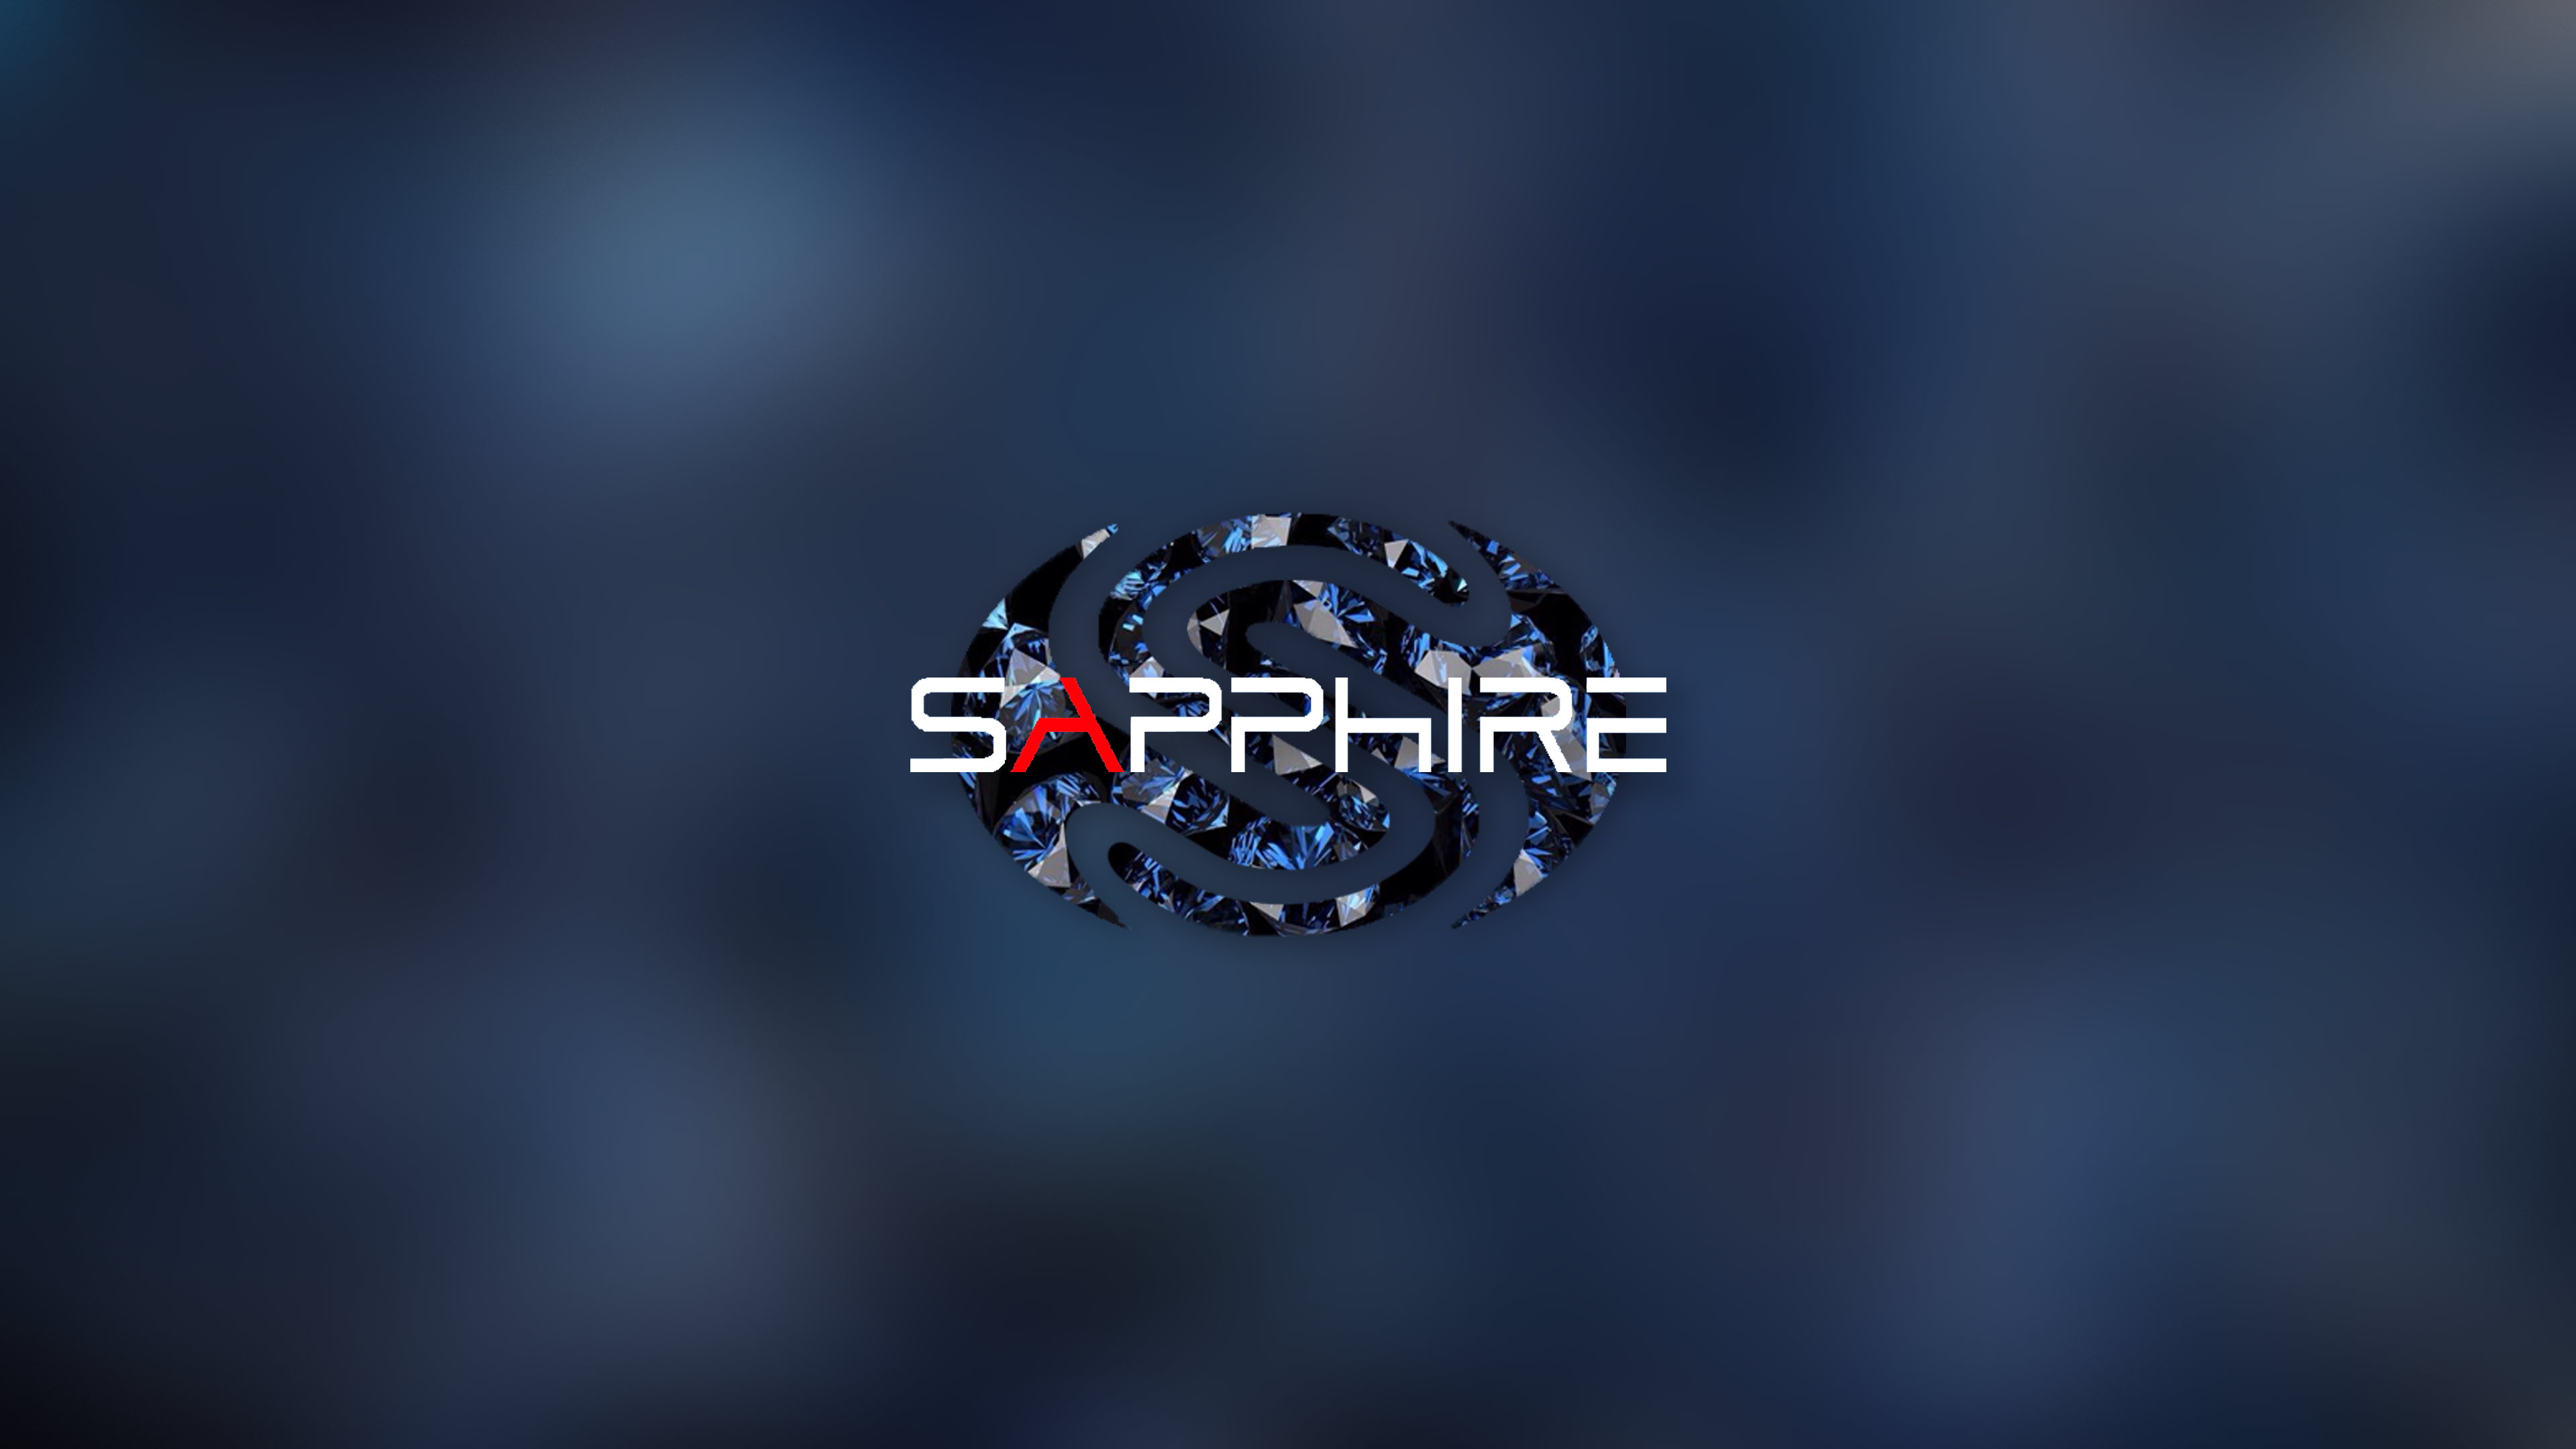 Saphire Wallpapers